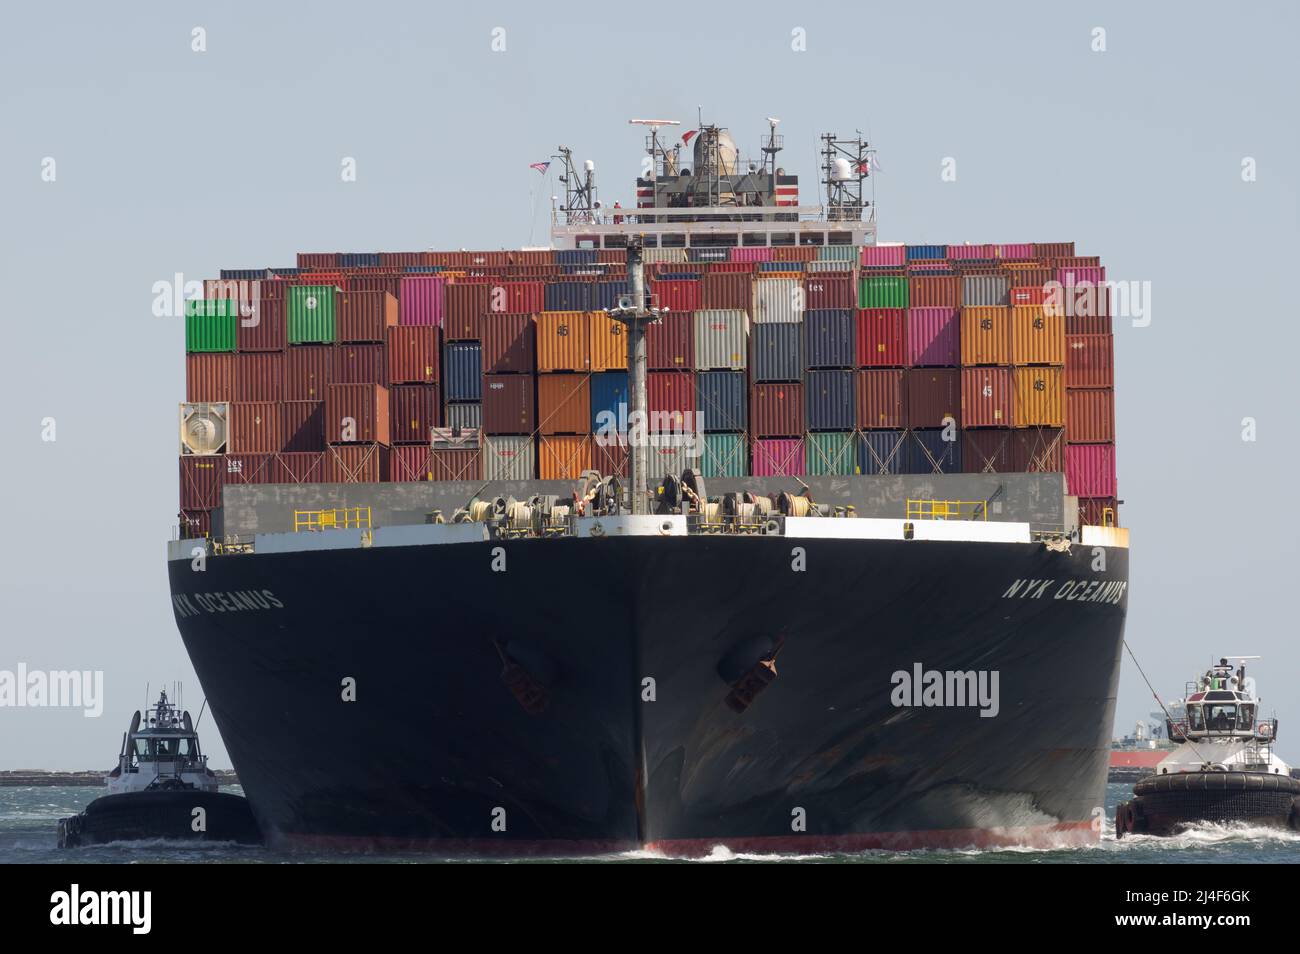 NYK Line container ship Oceanus shown entering the Port of Los Angeles, California, USA, on April 12, 2022. Stock Photo